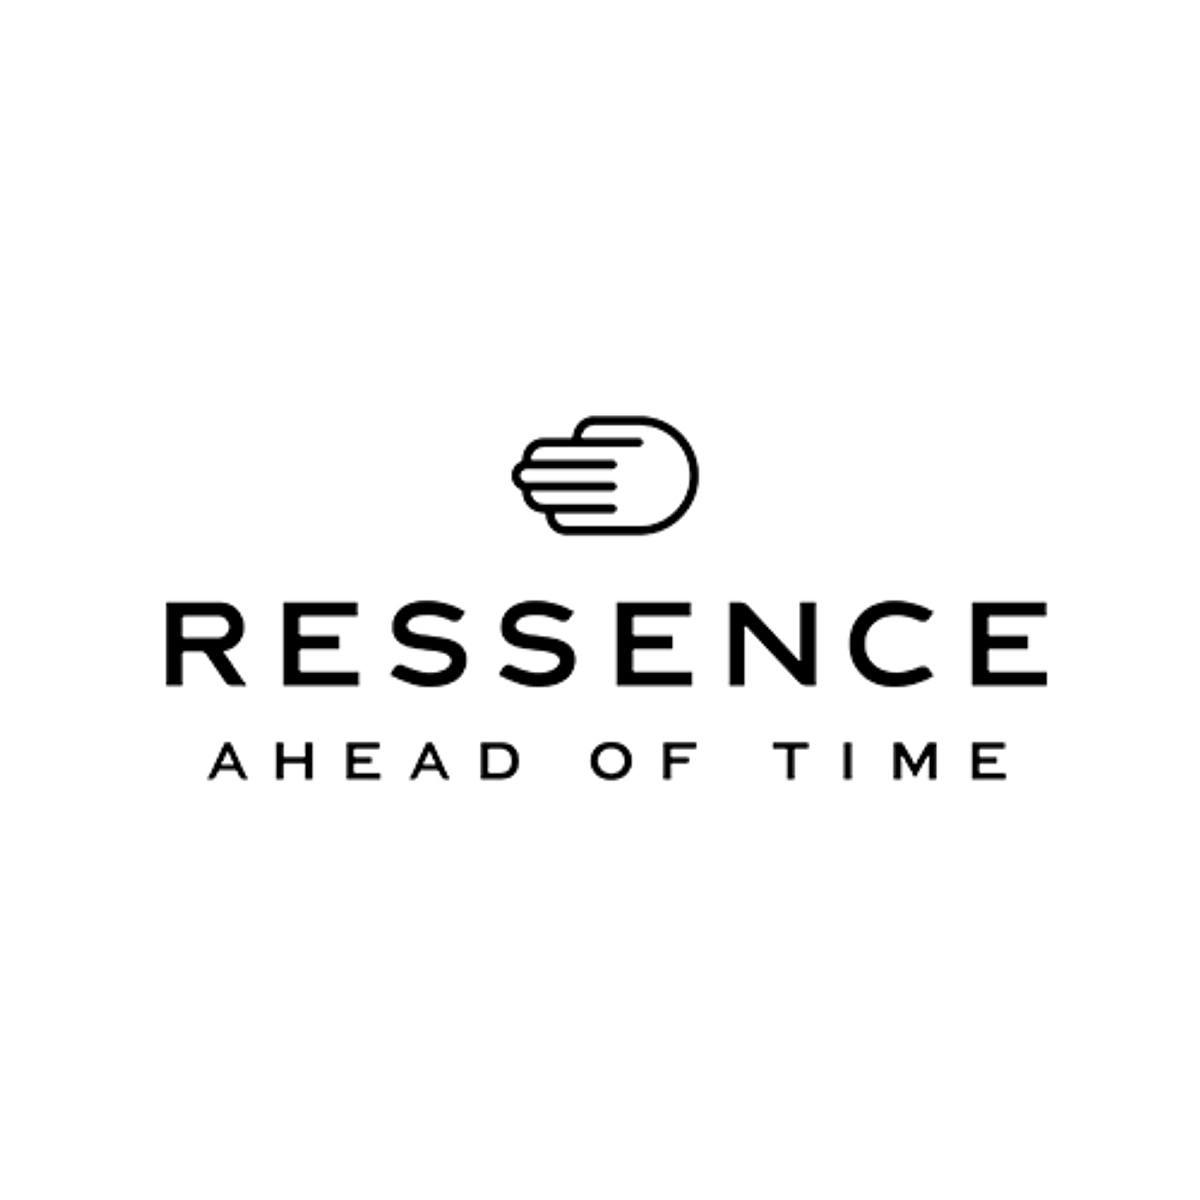 Ahead of time – Ressence